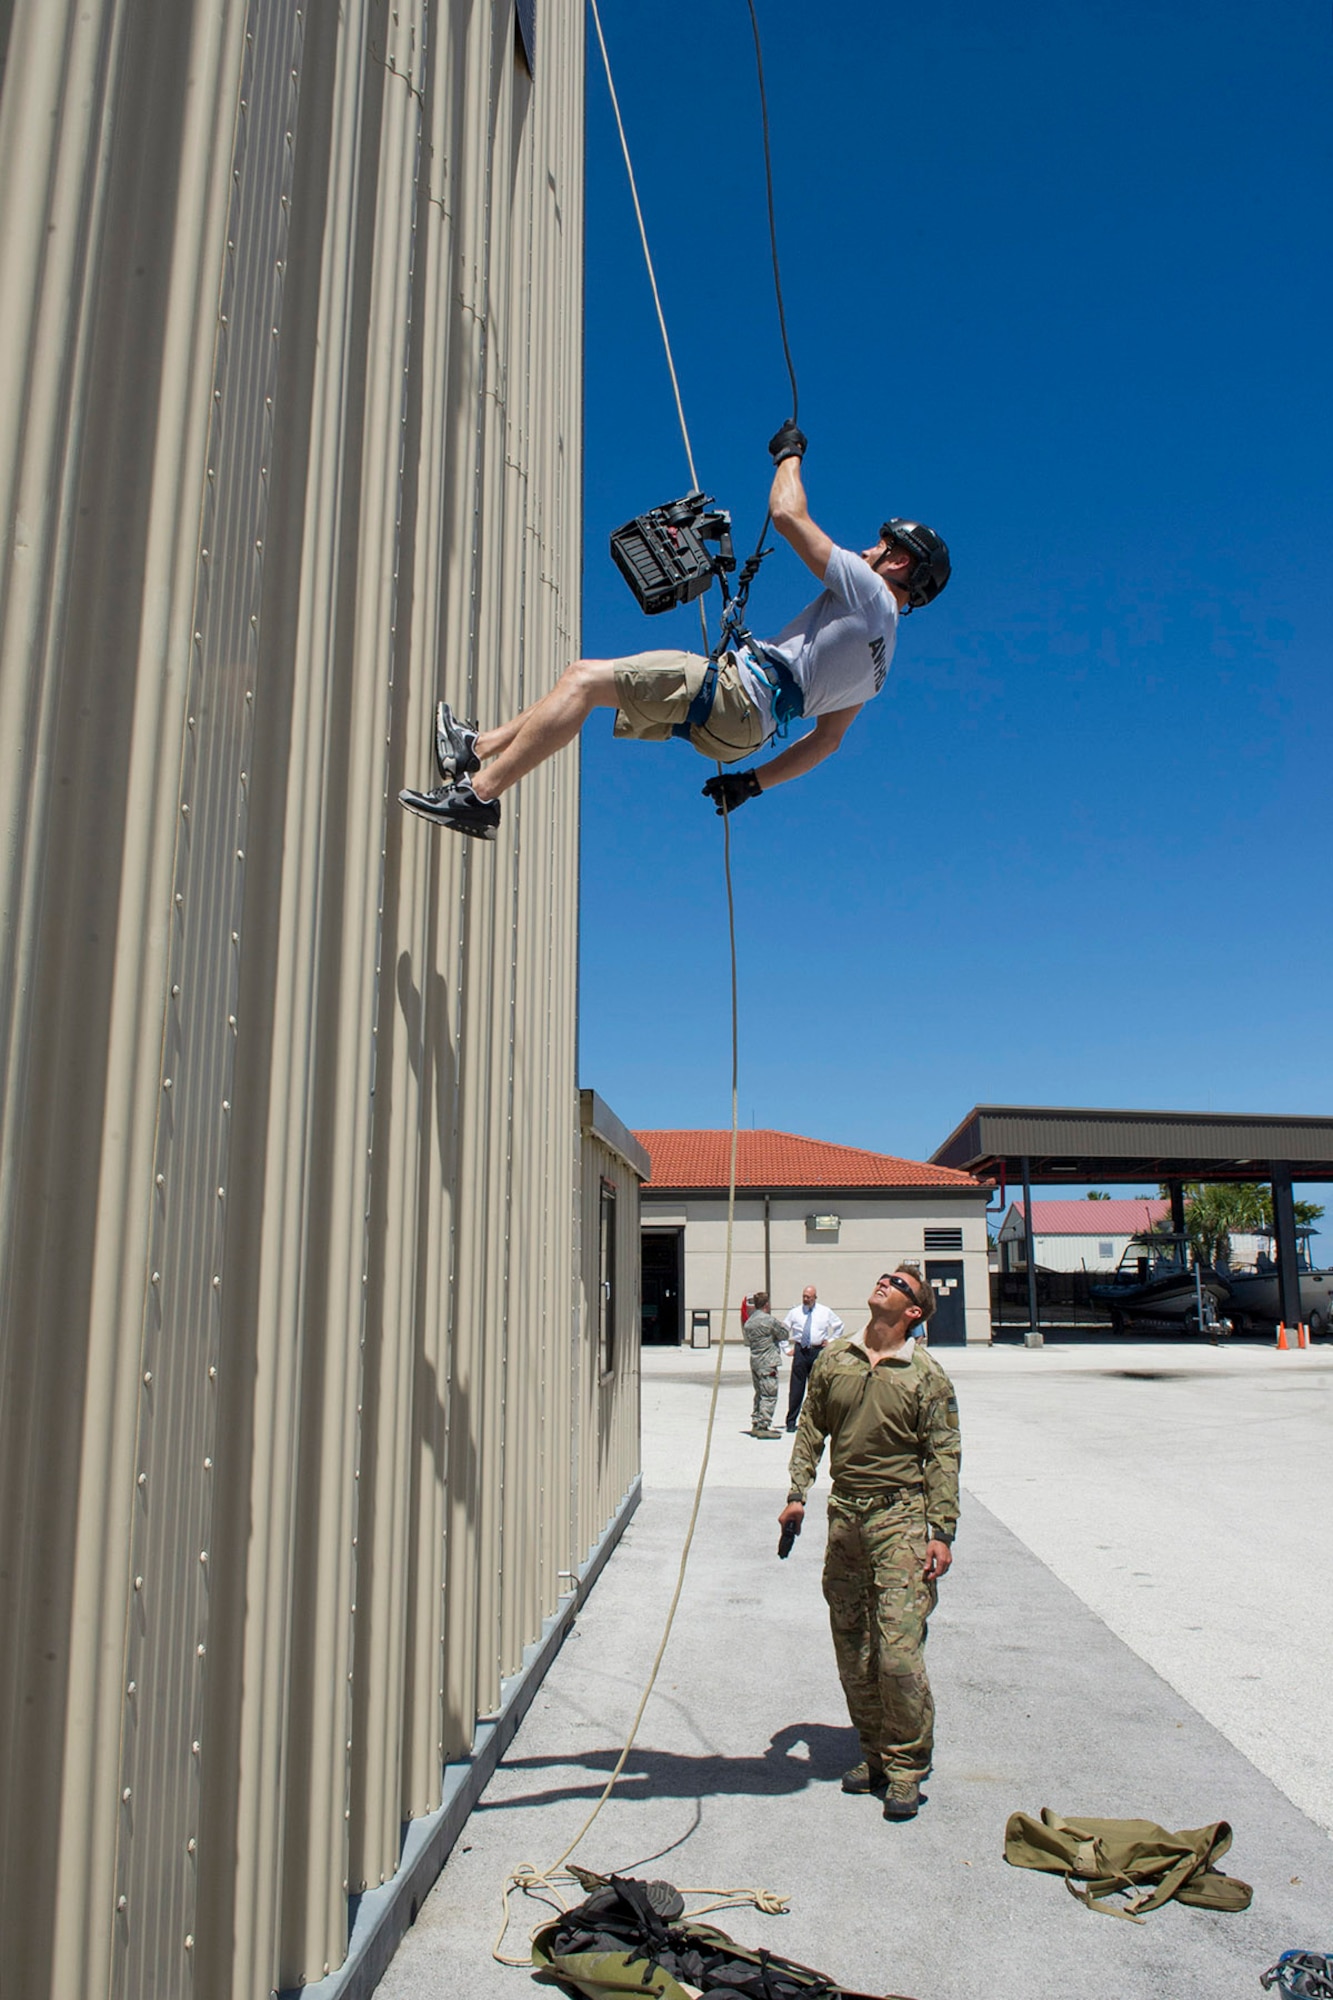 Tech. Sgt. Kyle Minshew, 308th Rescue Squadron pararescueman, guides American Ninja Warrior star Brent Steffensen as he rappels down the unit’s training tower April 21, 2017 at Patrick Air Force Base, Florida. Steffensen visited the base as part of the Alpha Warrior Military Tour. (U.S. Air Force photo/Phillip Sunkel)